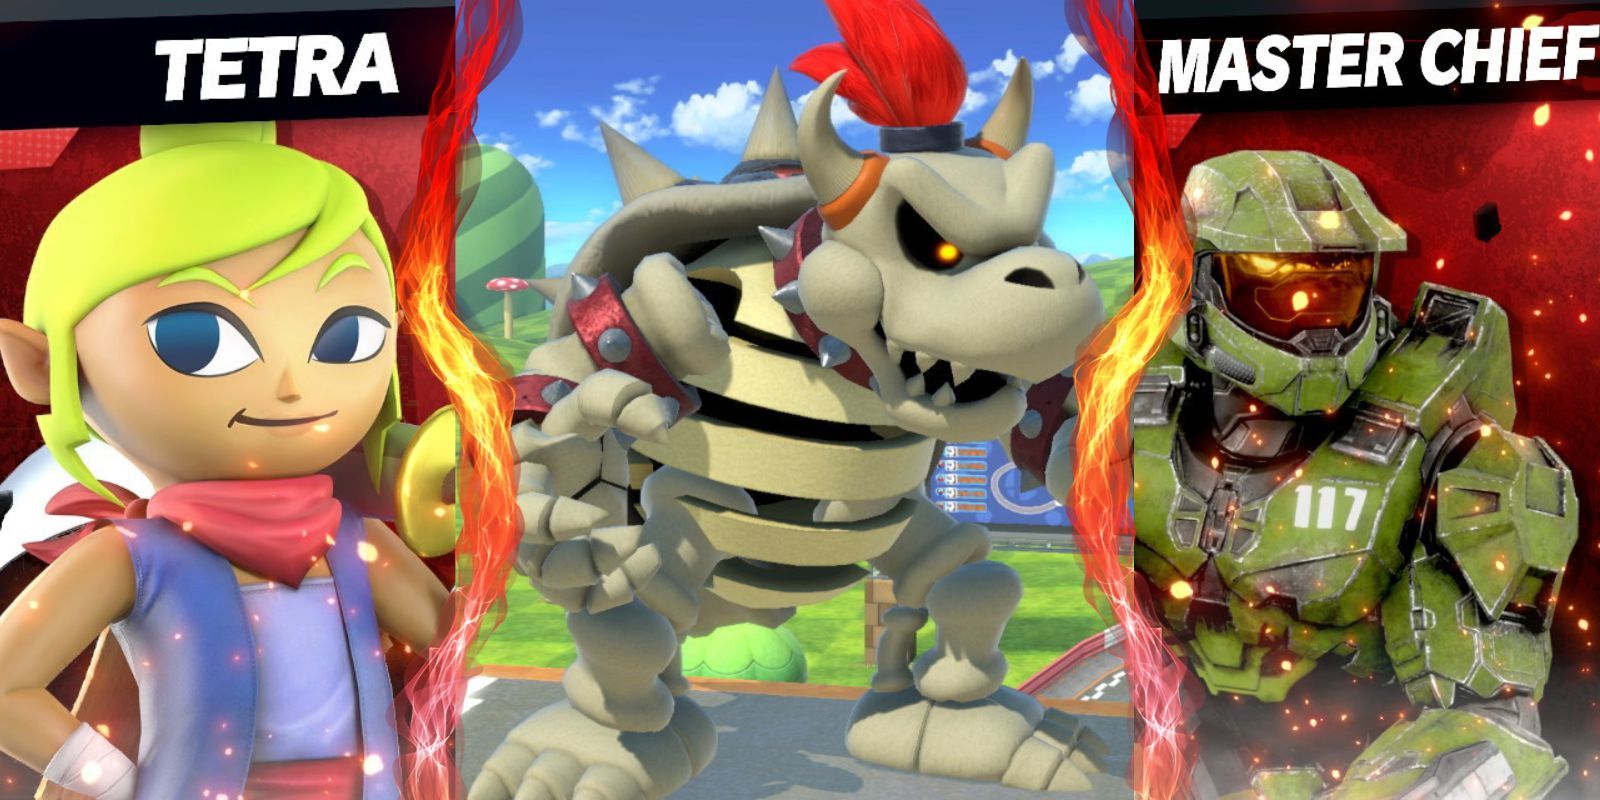 Tetra, Dry Bones Bowser, and Master Chief as custom skins in Smash Bros Ultimate